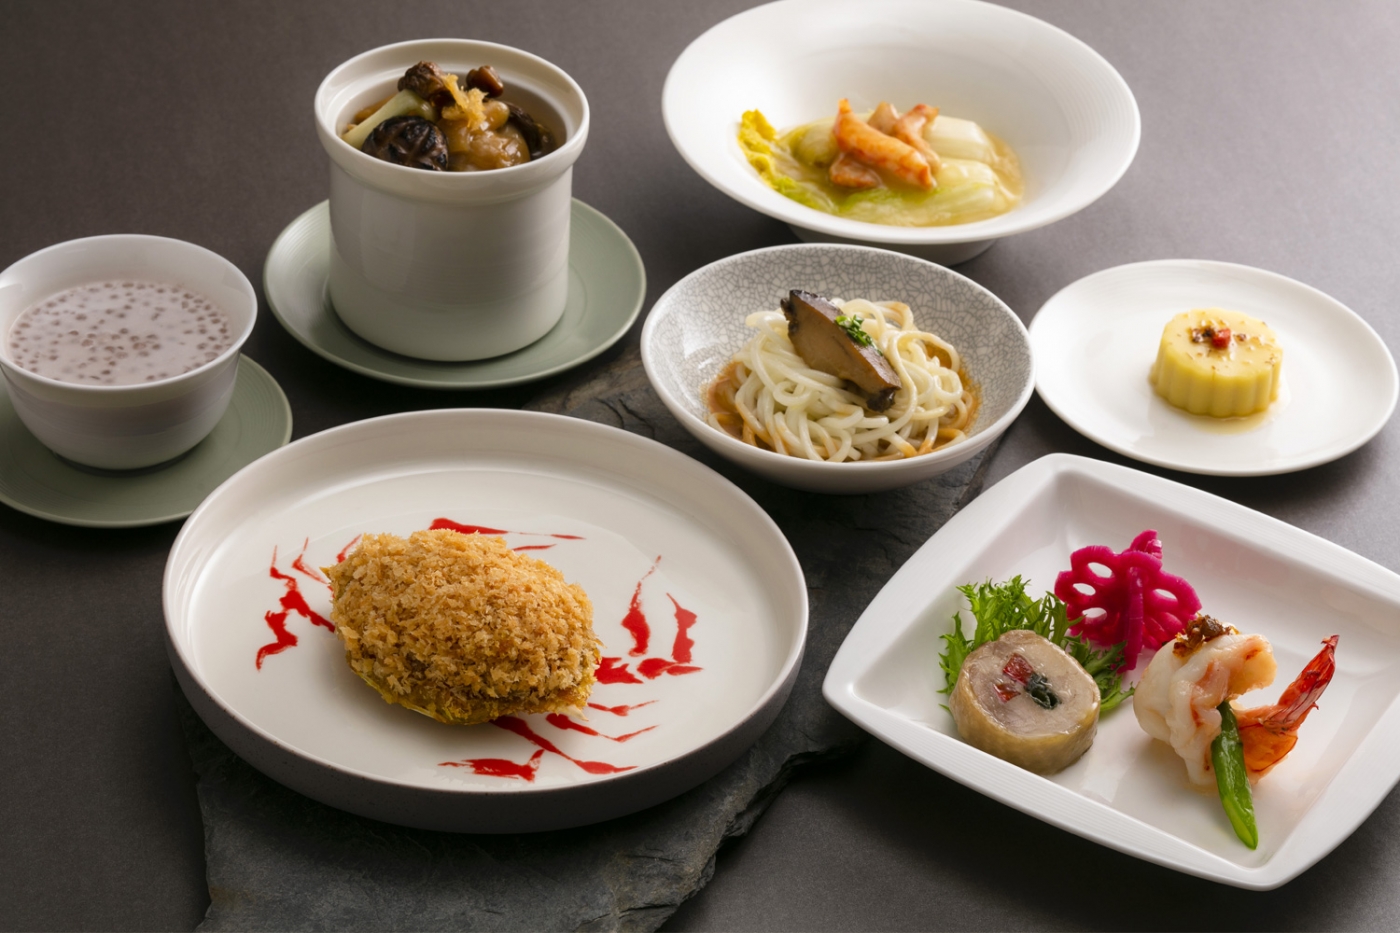 Meal by Executive Chef Weng-Kuang Hsu of Yu Yue Lou Restaurant